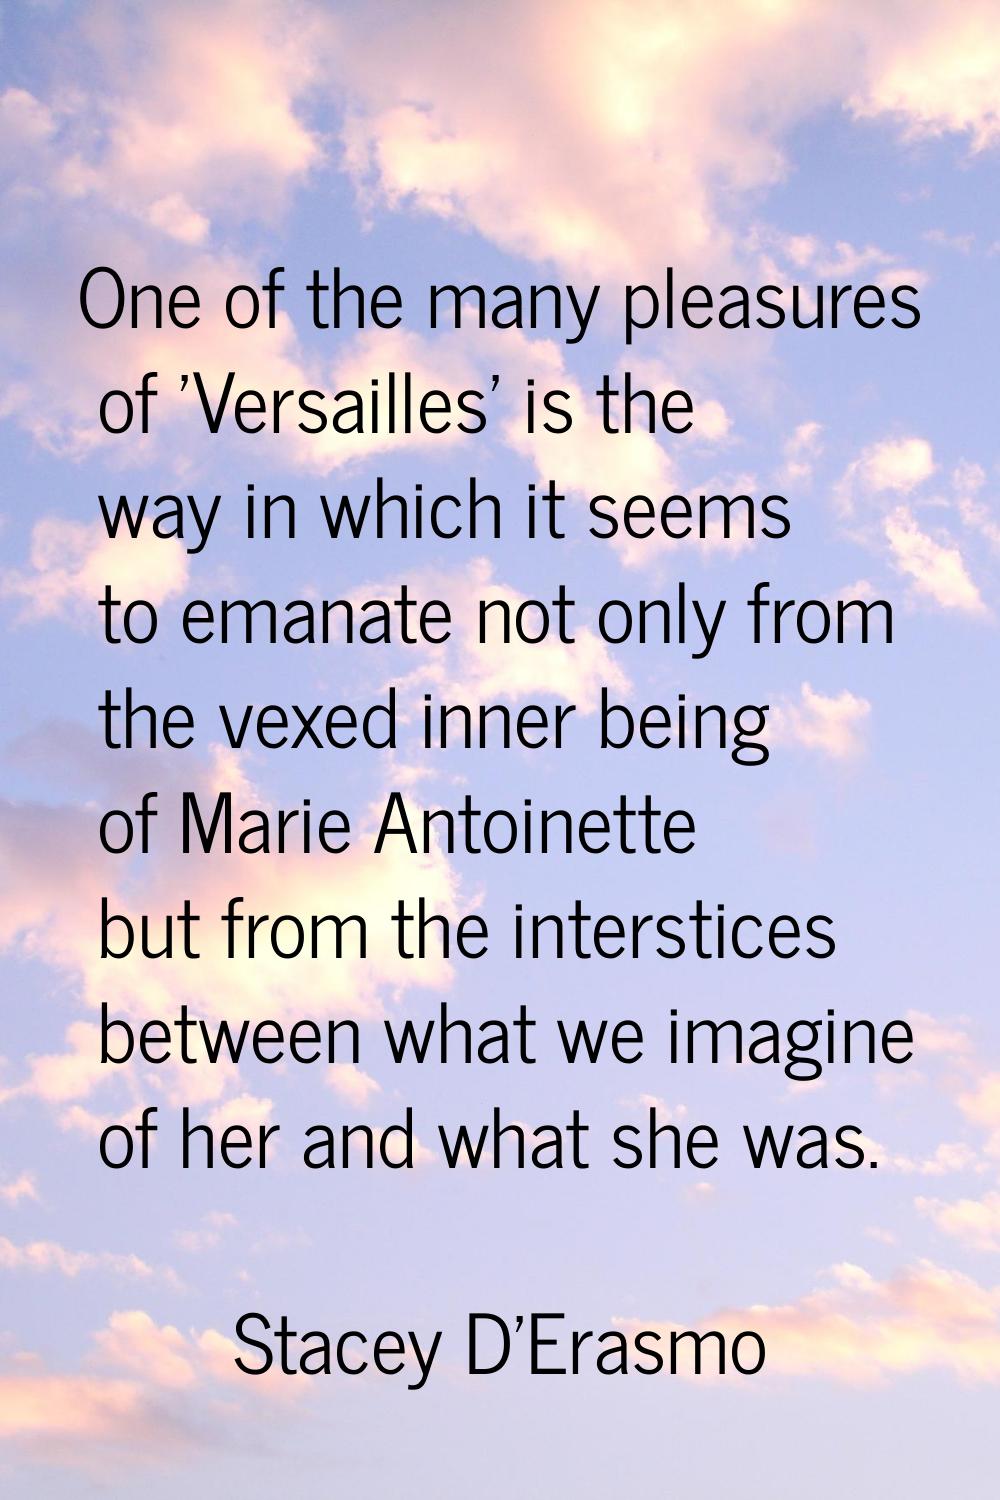 One of the many pleasures of 'Versailles' is the way in which it seems to emanate not only from the